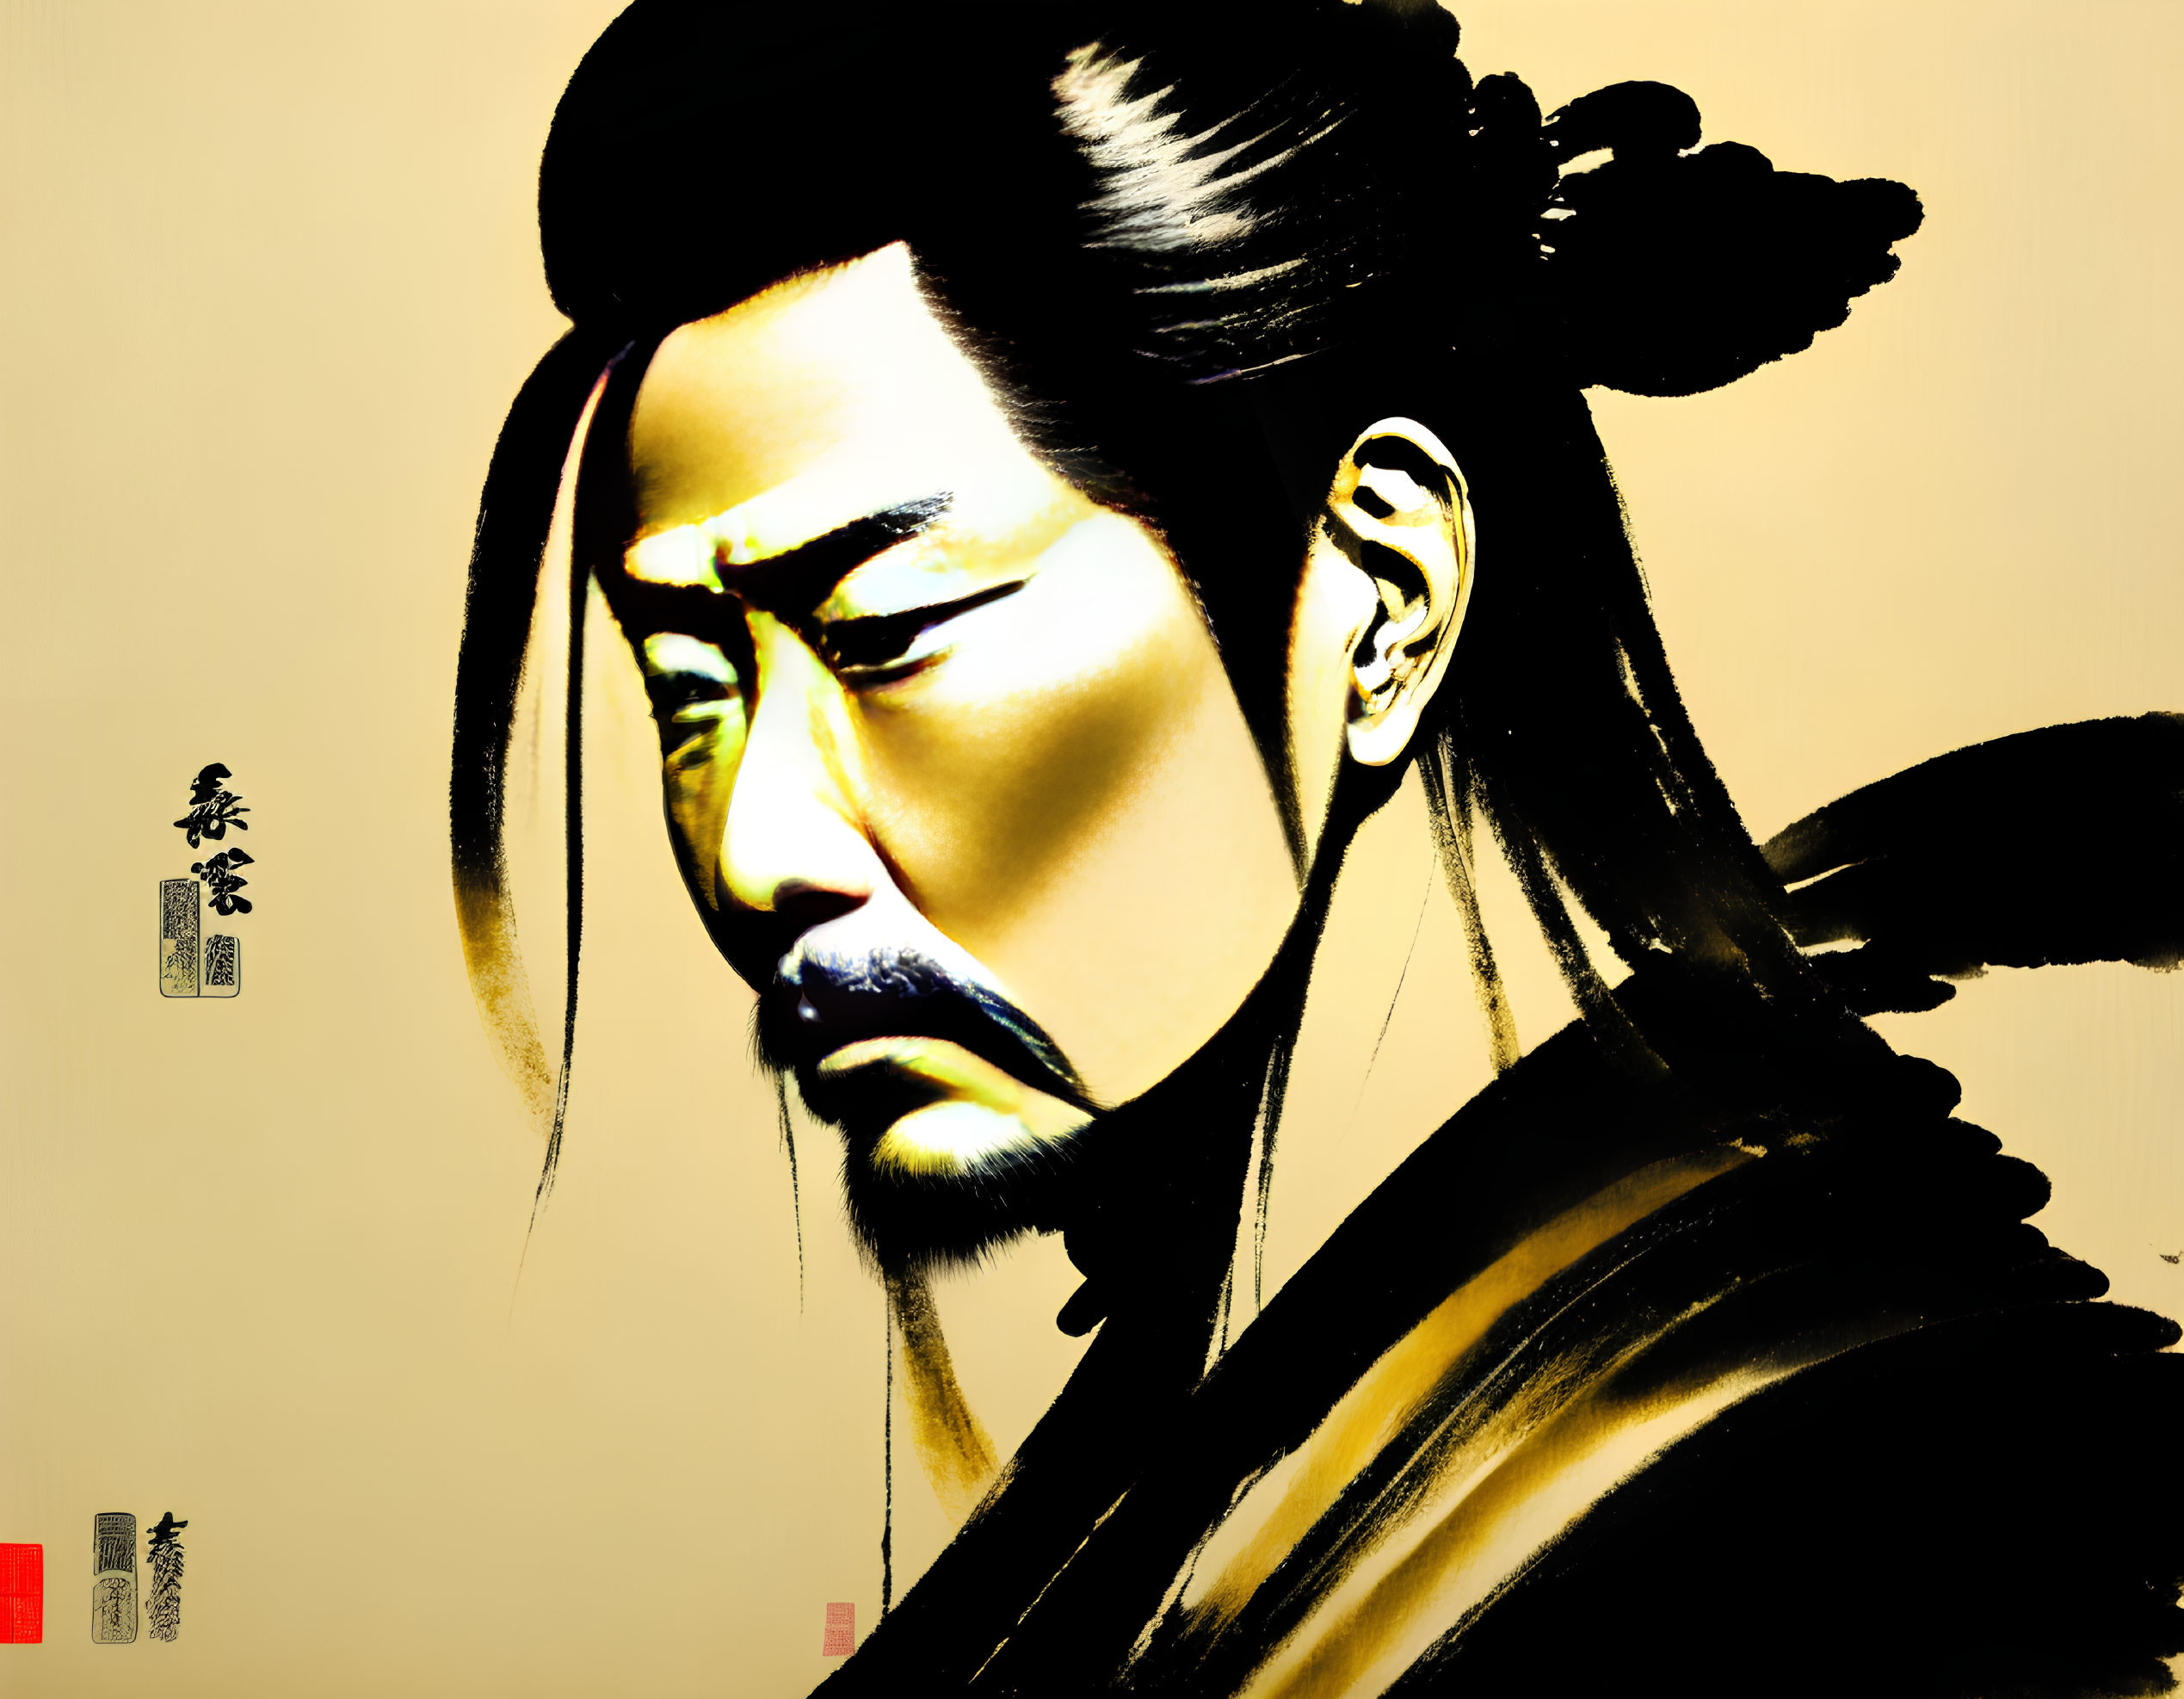 Traditional Asian-style painting of historical male figure with stern expression on gold background